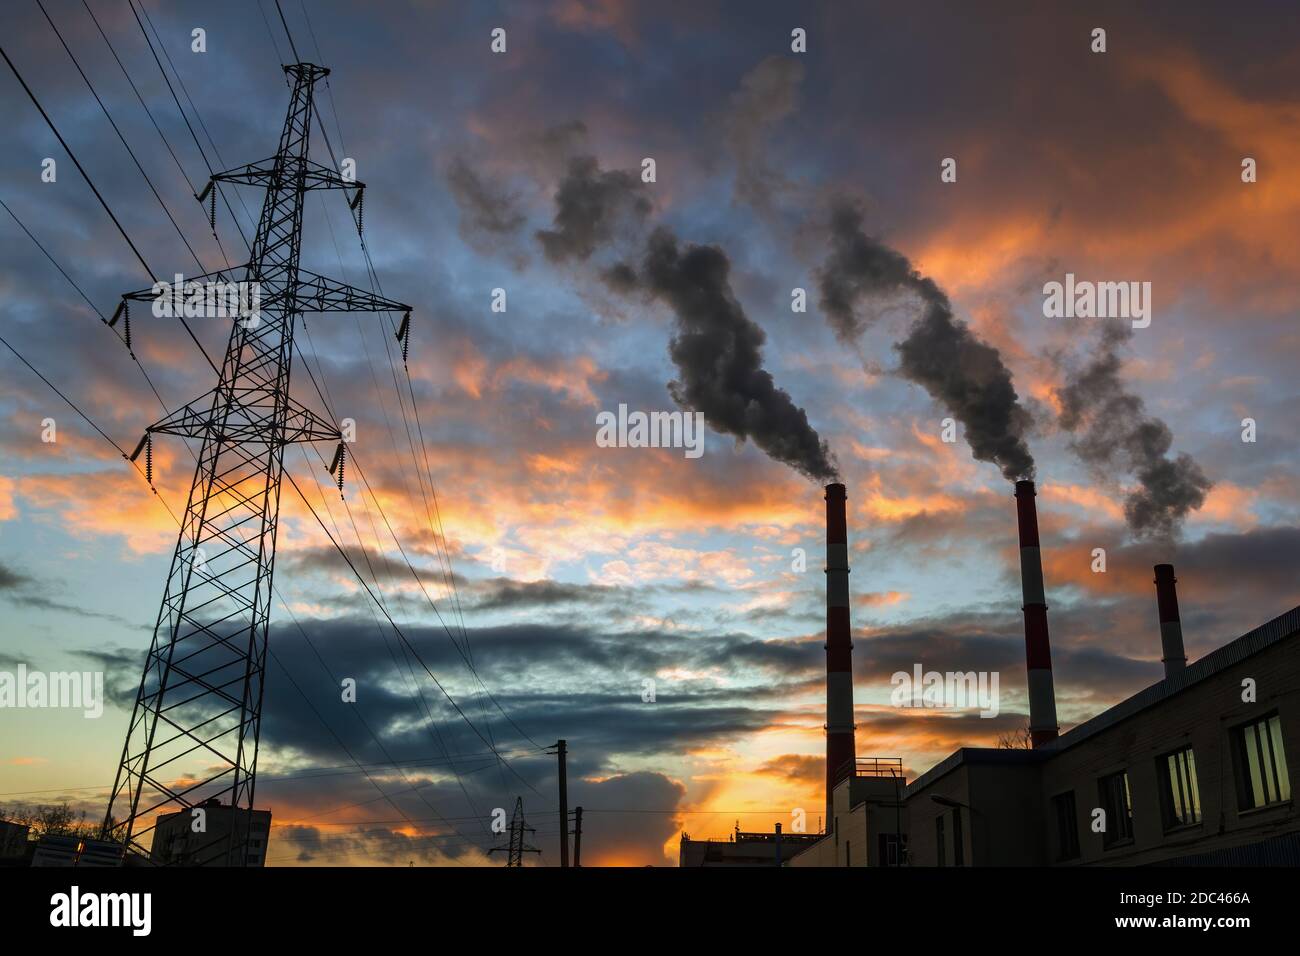 Silhouette of steel lattice tower, three chimneys smoke on dramatic sunset sky background. Transmission tower and industry pipes. Industrial cityscape Stock Photo